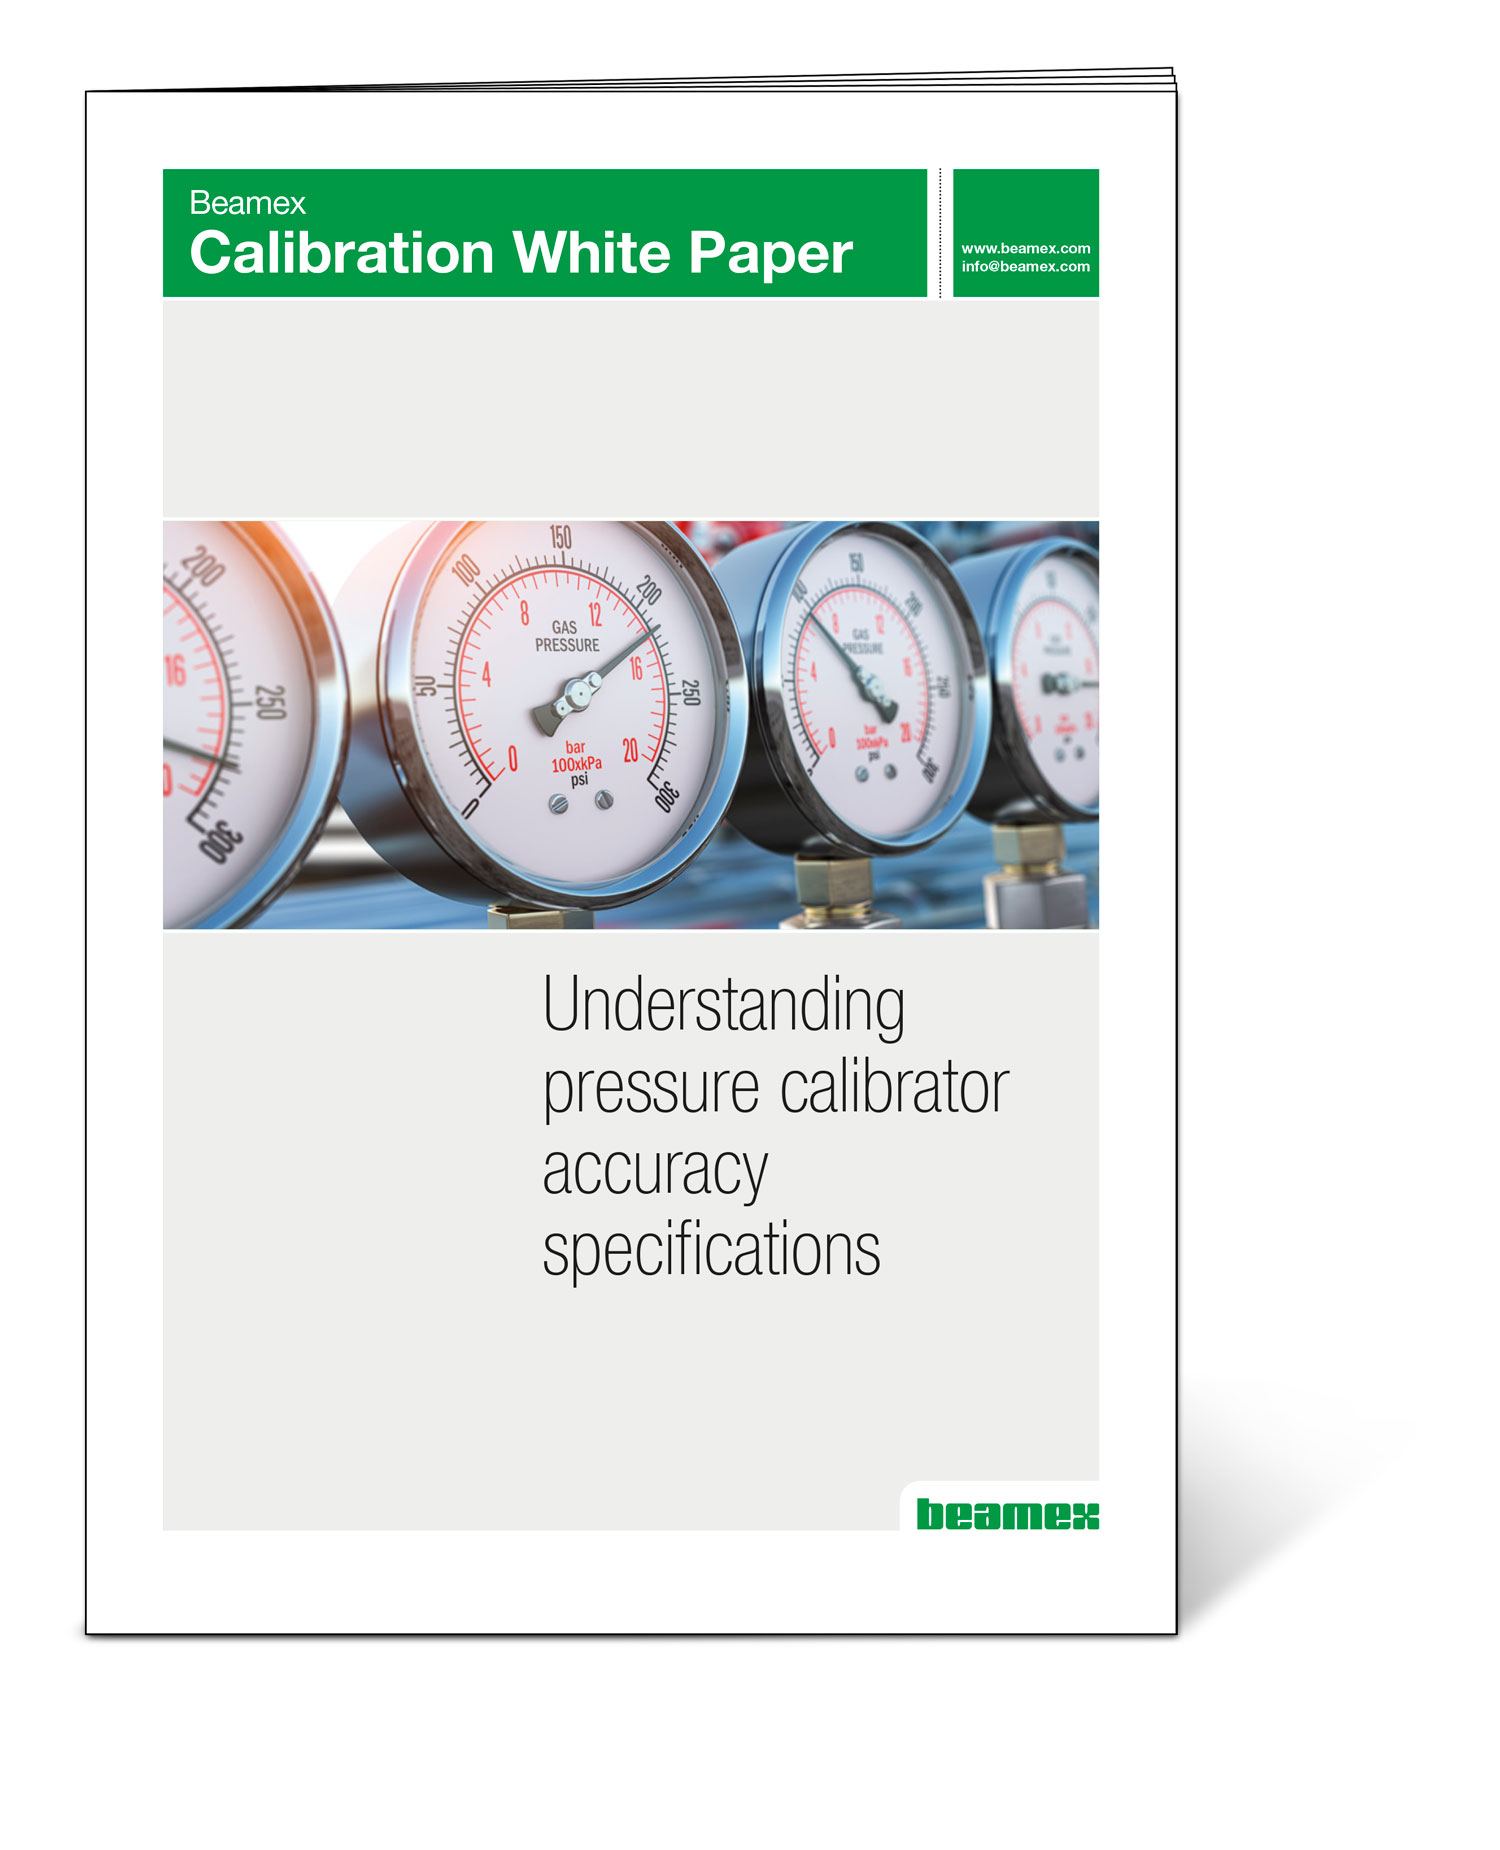 https://2203666.fs1.hubspotusercontent-na1.net/hubfs/2203666/Beamex_White_Papers/Beamex-WP-Understanding-pressure-calibrator-accuracy-specifications-1500px-v1.jpg